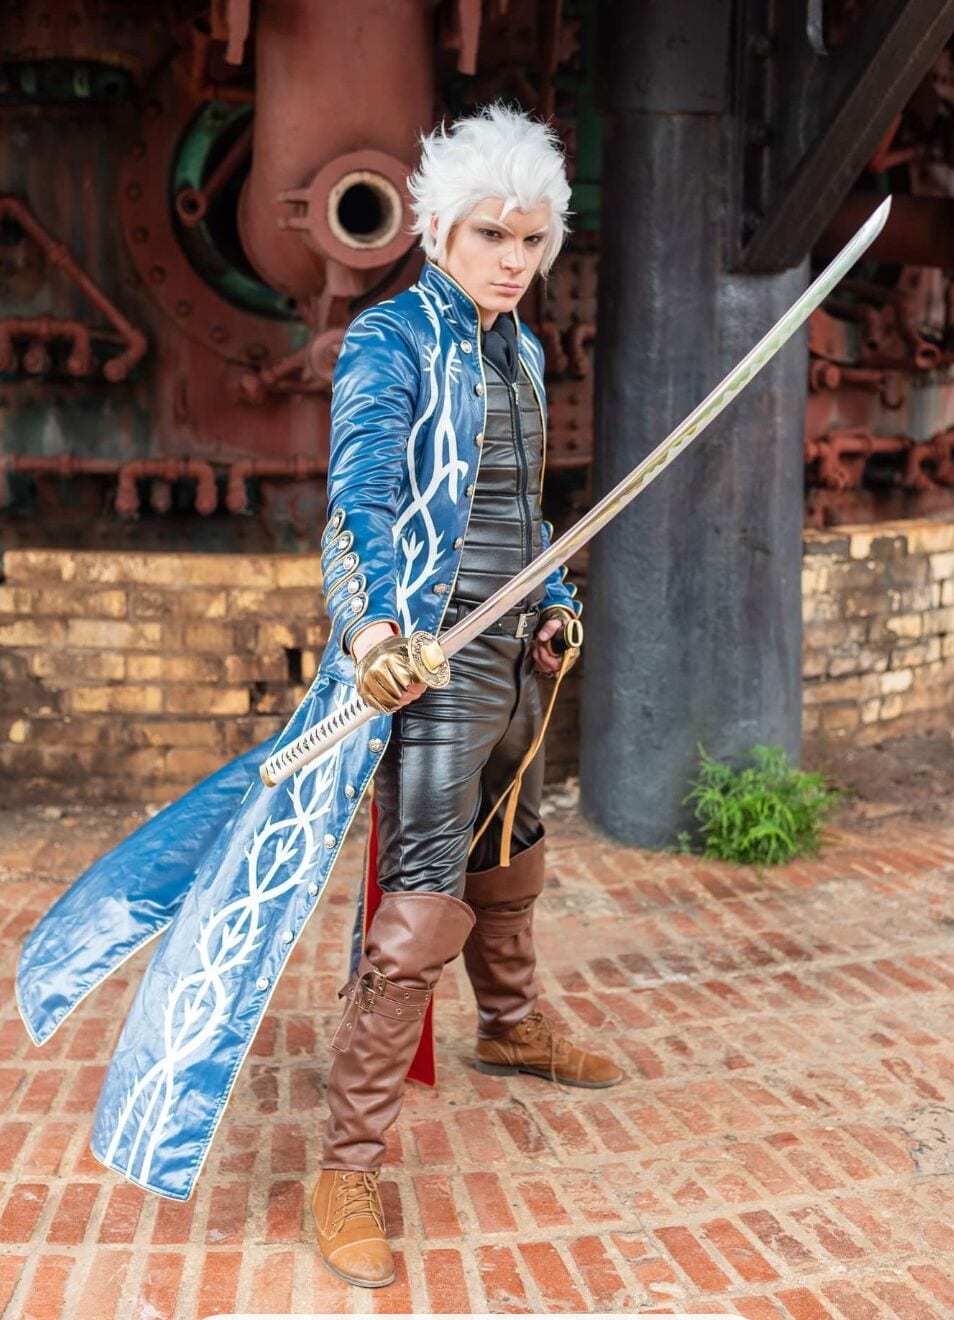  LQSLFsword Devil May Cry 5 Vergil Anime Cosplay Sword Warrior  Yamato Sword/Dante's Rebellion， 41in Katana Sword Real, Hand Forged,1060  Steel : Sports & Outdoors